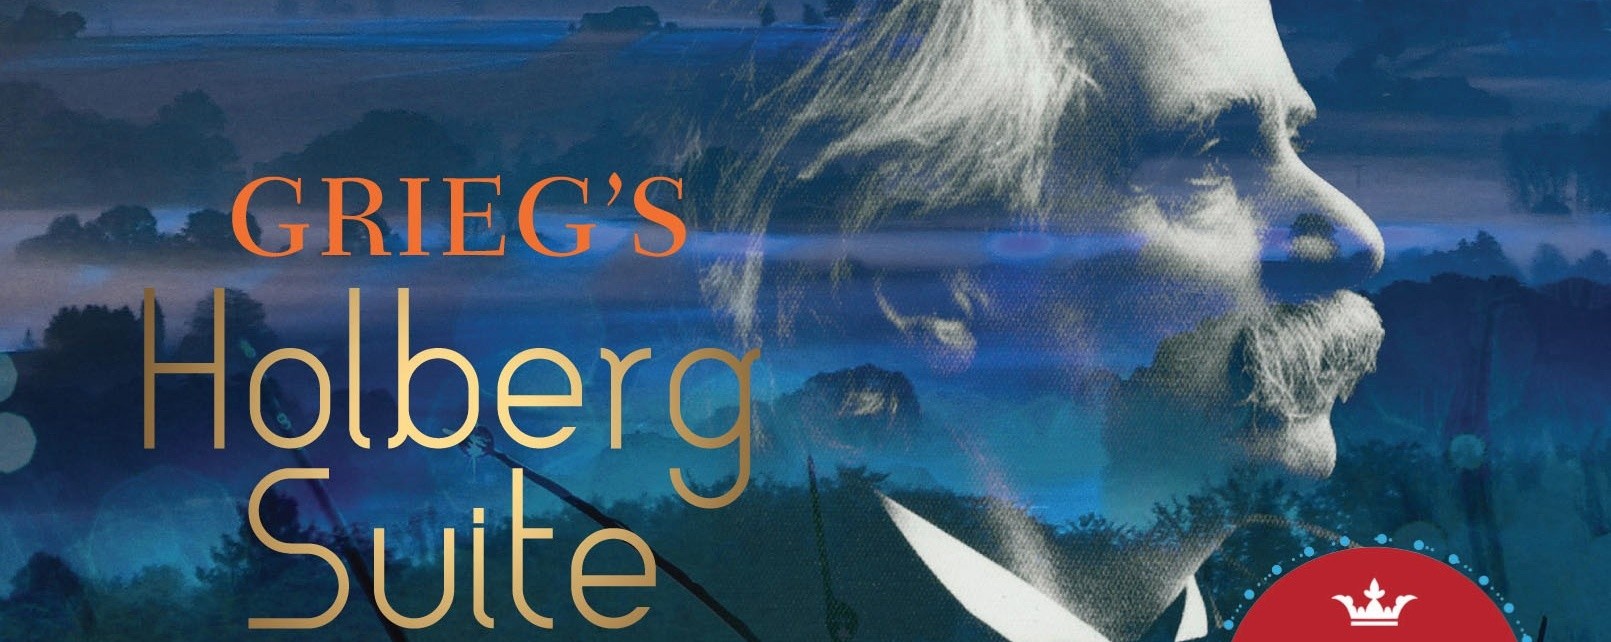 VCH Chamber Series: Grieg's Holberg Suite